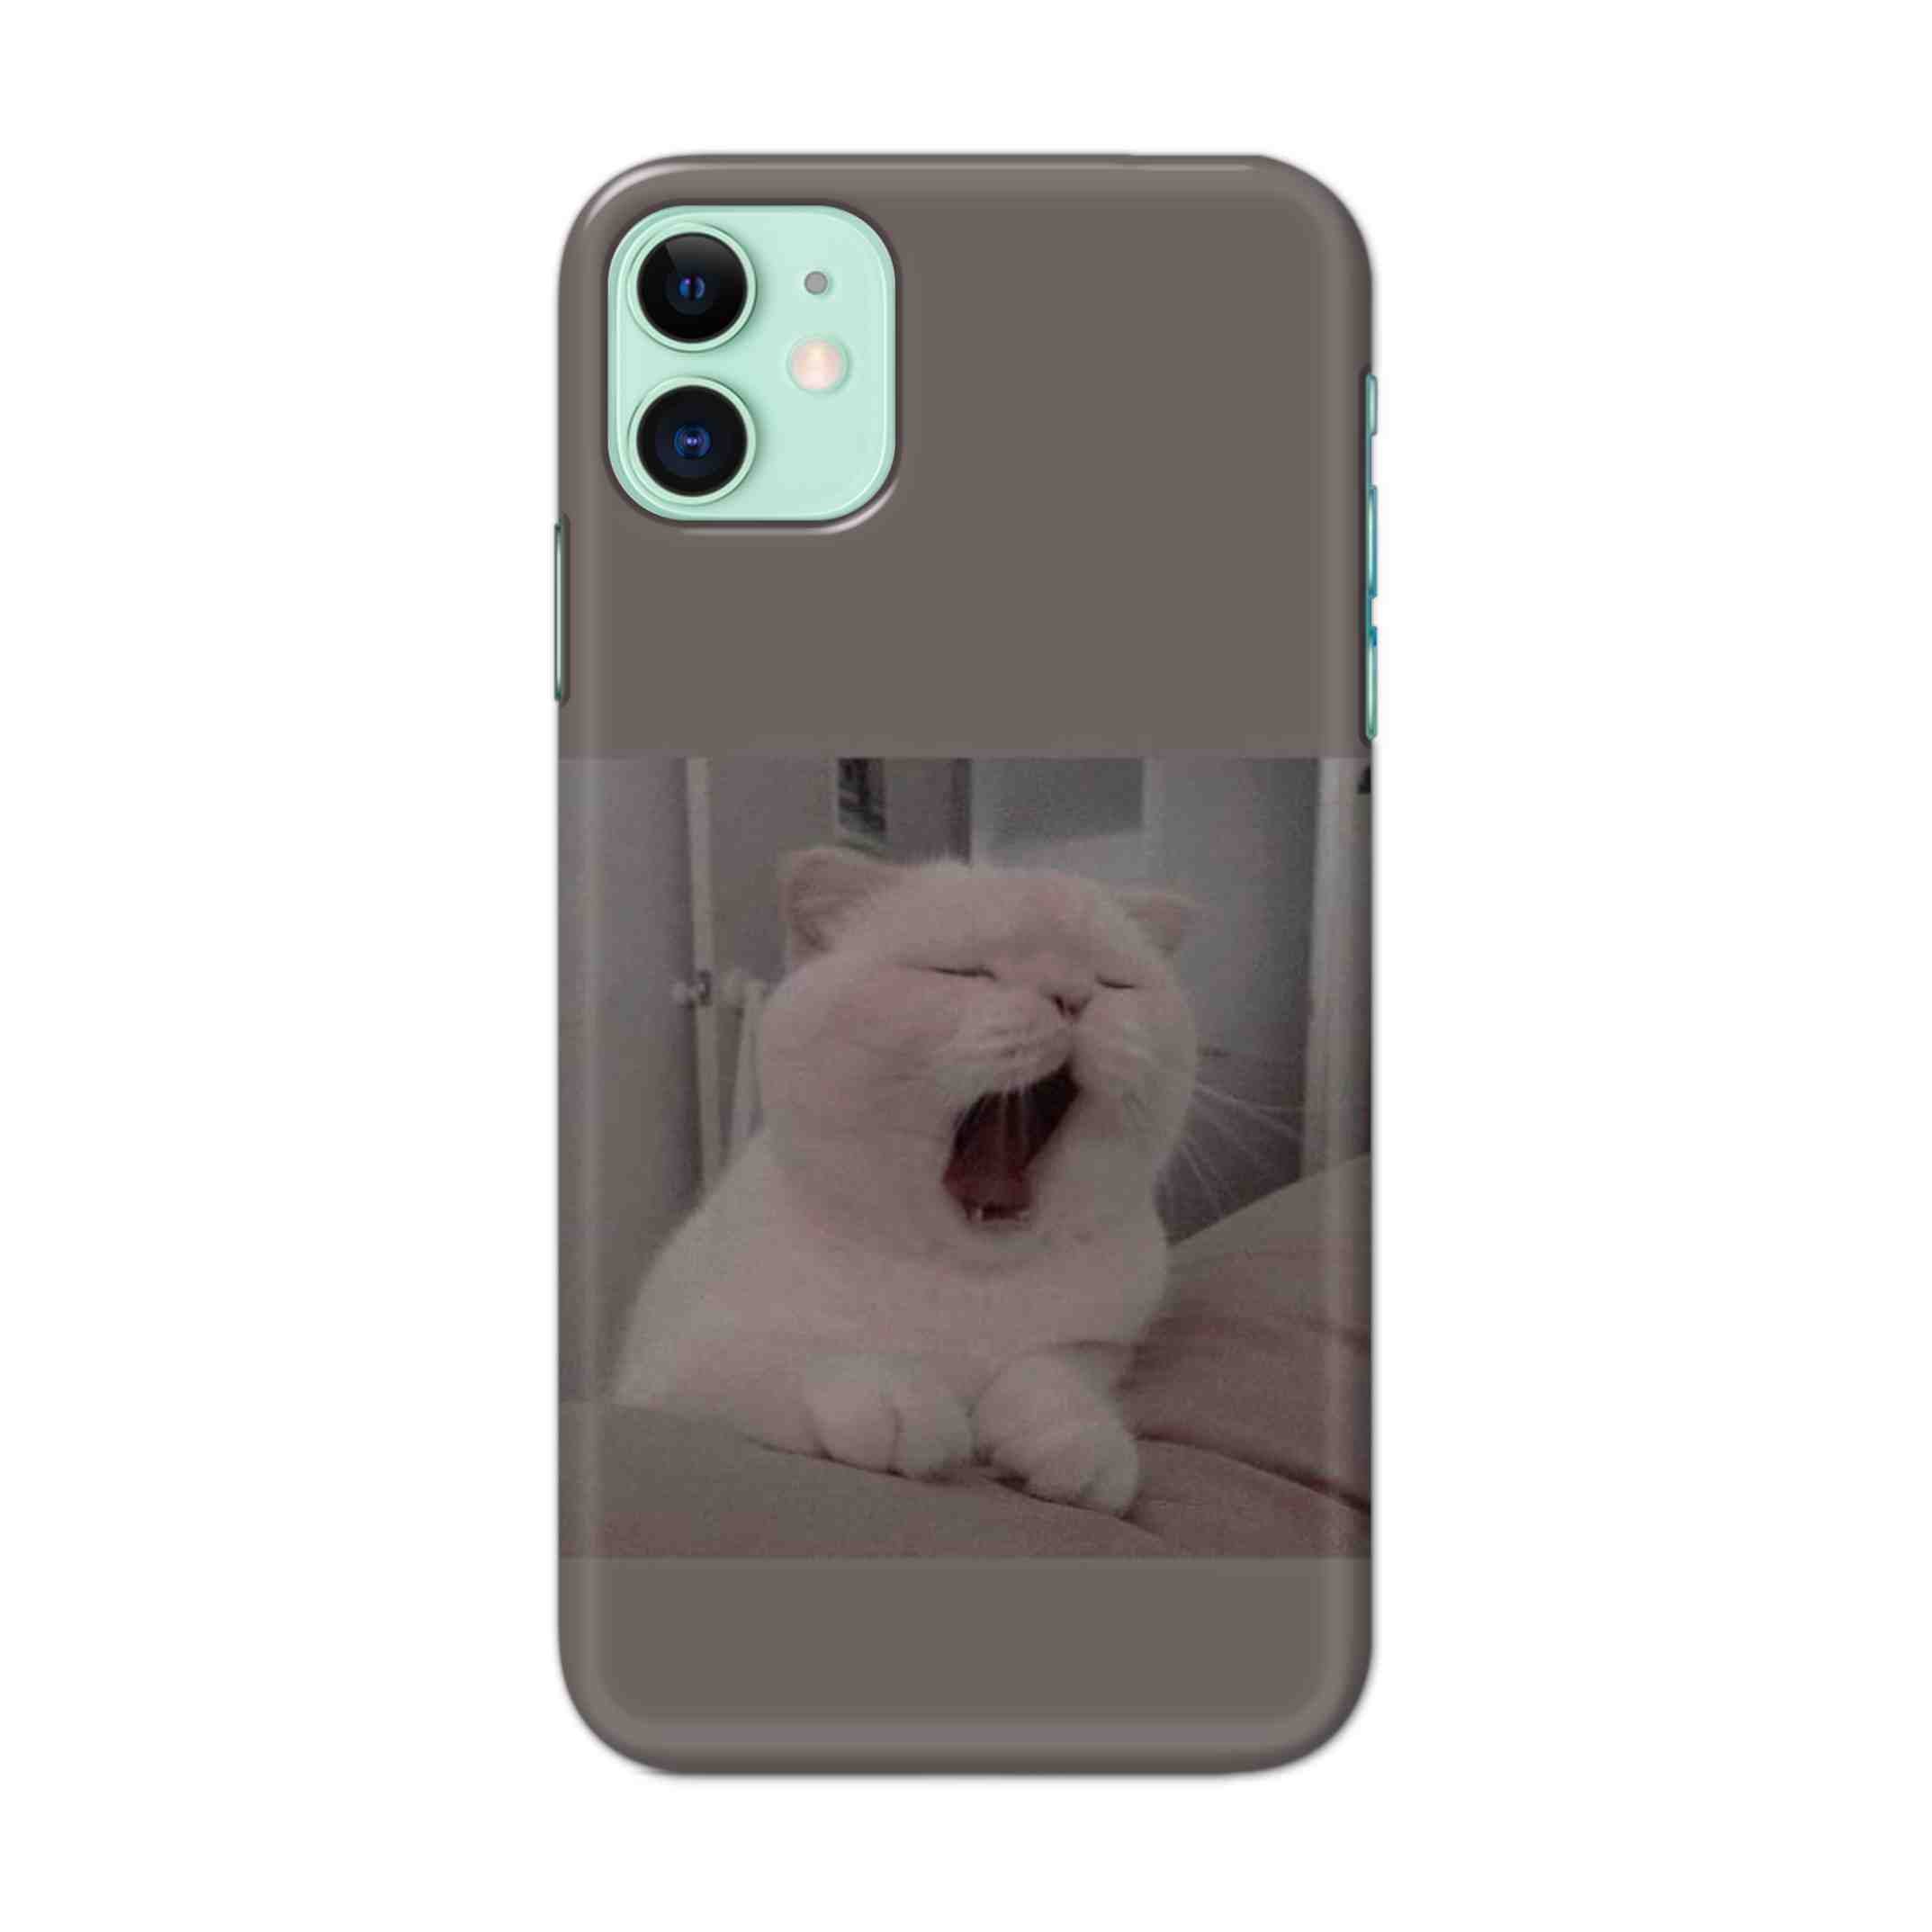 Buy Cute Cat Hard Back Mobile Phone Case Cover For iPhone 11 Online